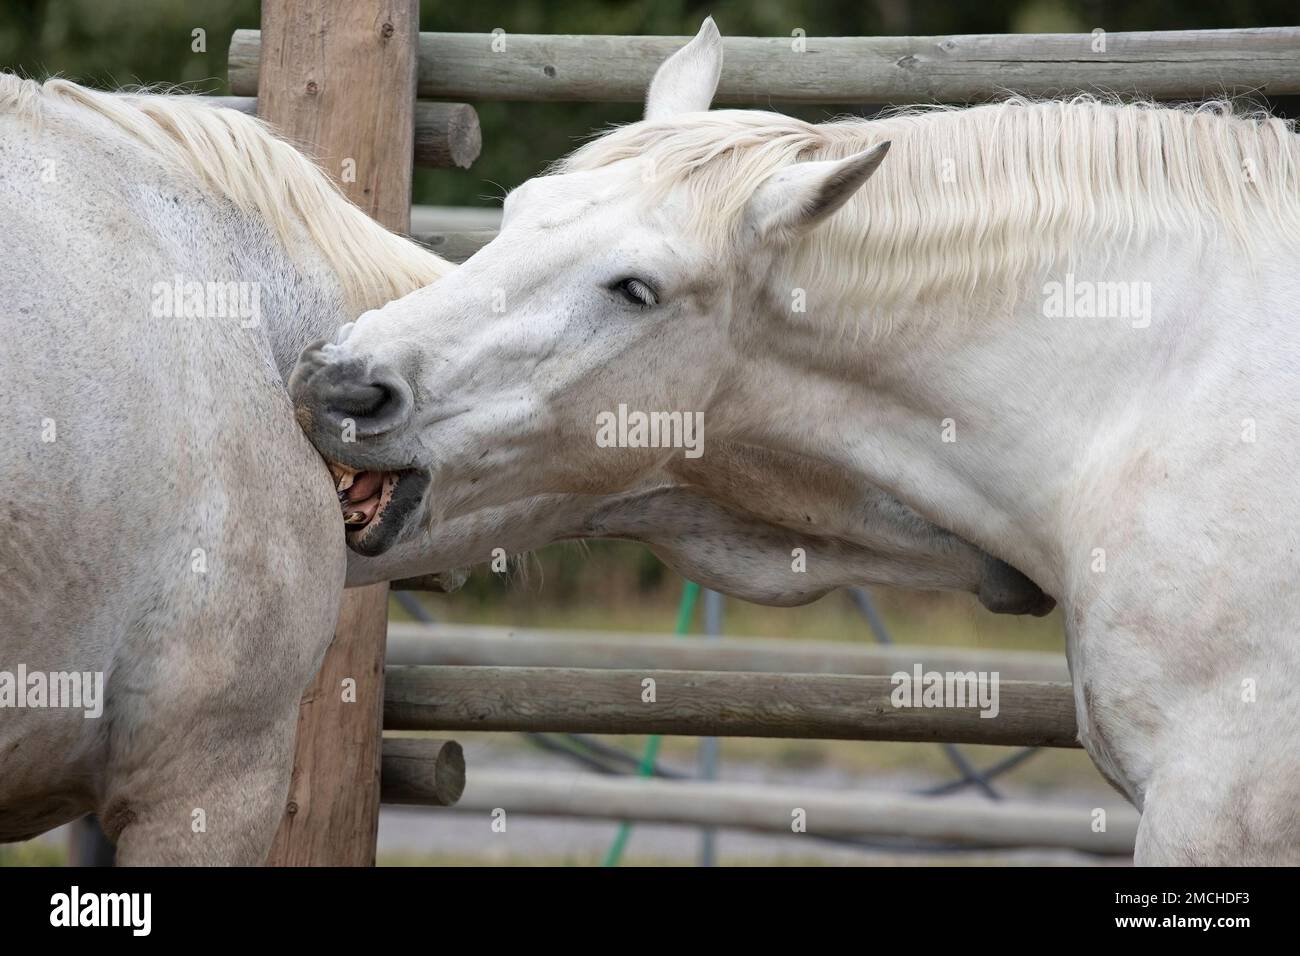 Percheron draft horses mutual grooming by scratching each other on the shoulder with their teeth. Bar U Ranch National Historic Site, Alberta, Canada Stock Photo